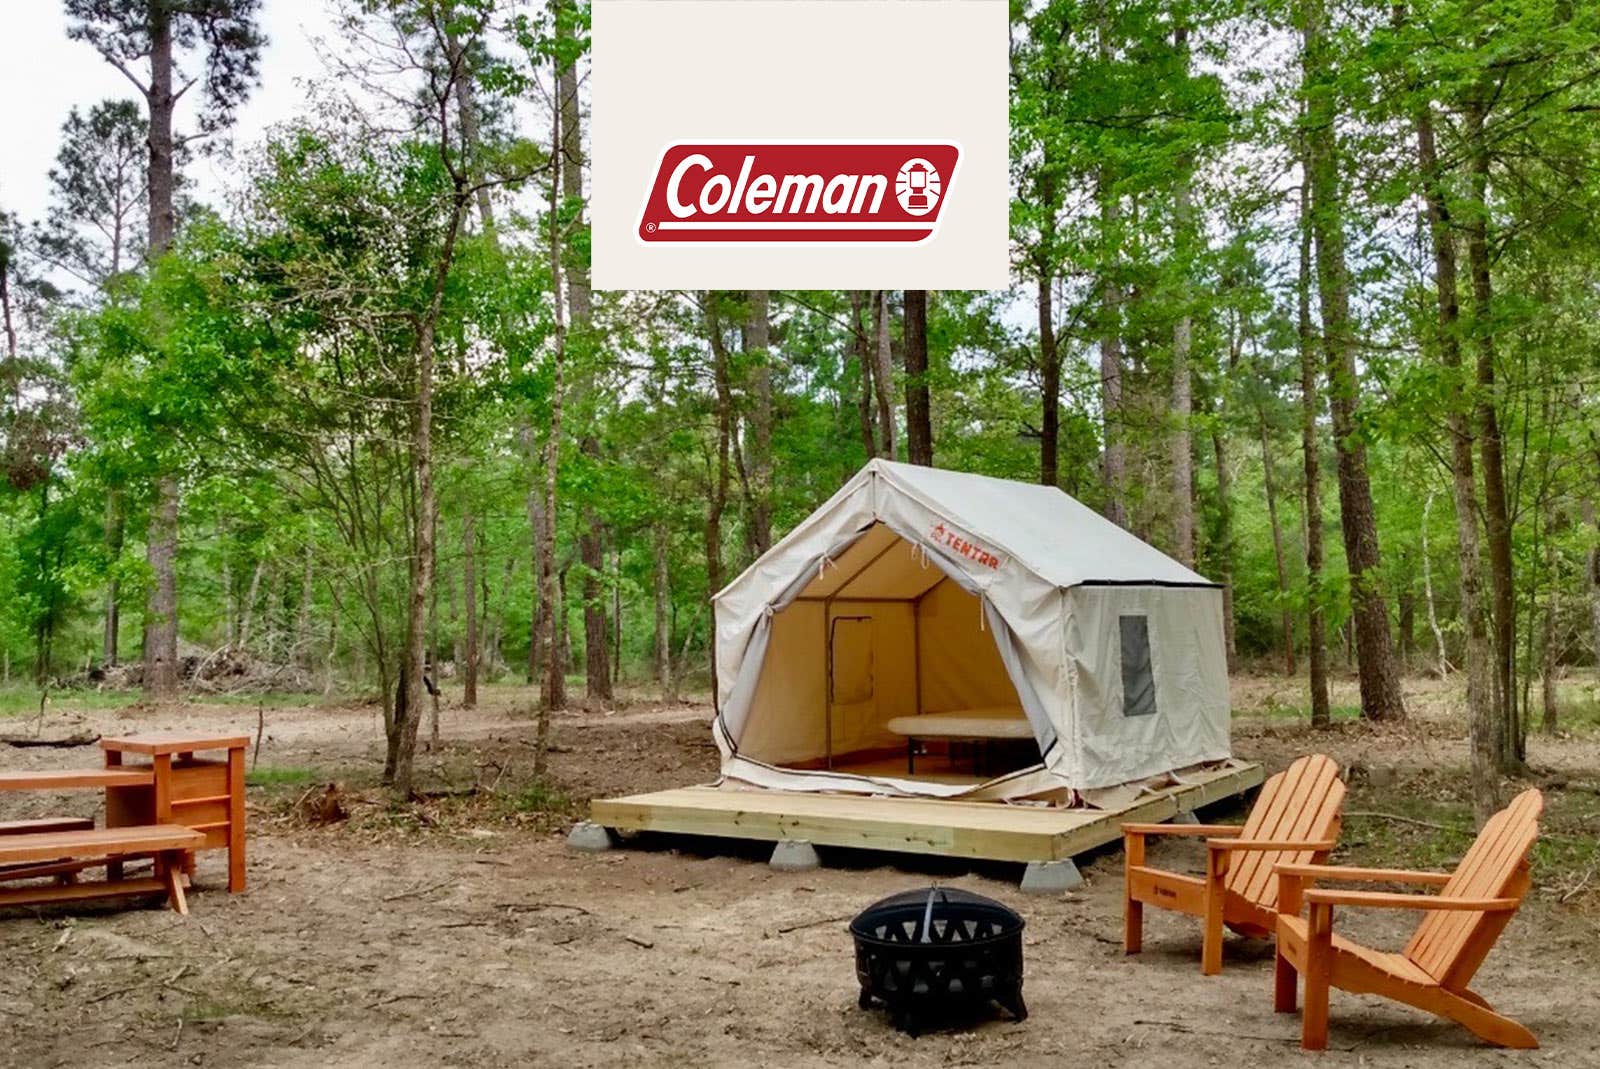 Camper submitted image from Tentrr Signature Site - Hidden Forest - Coleman Outfitted Site - 1